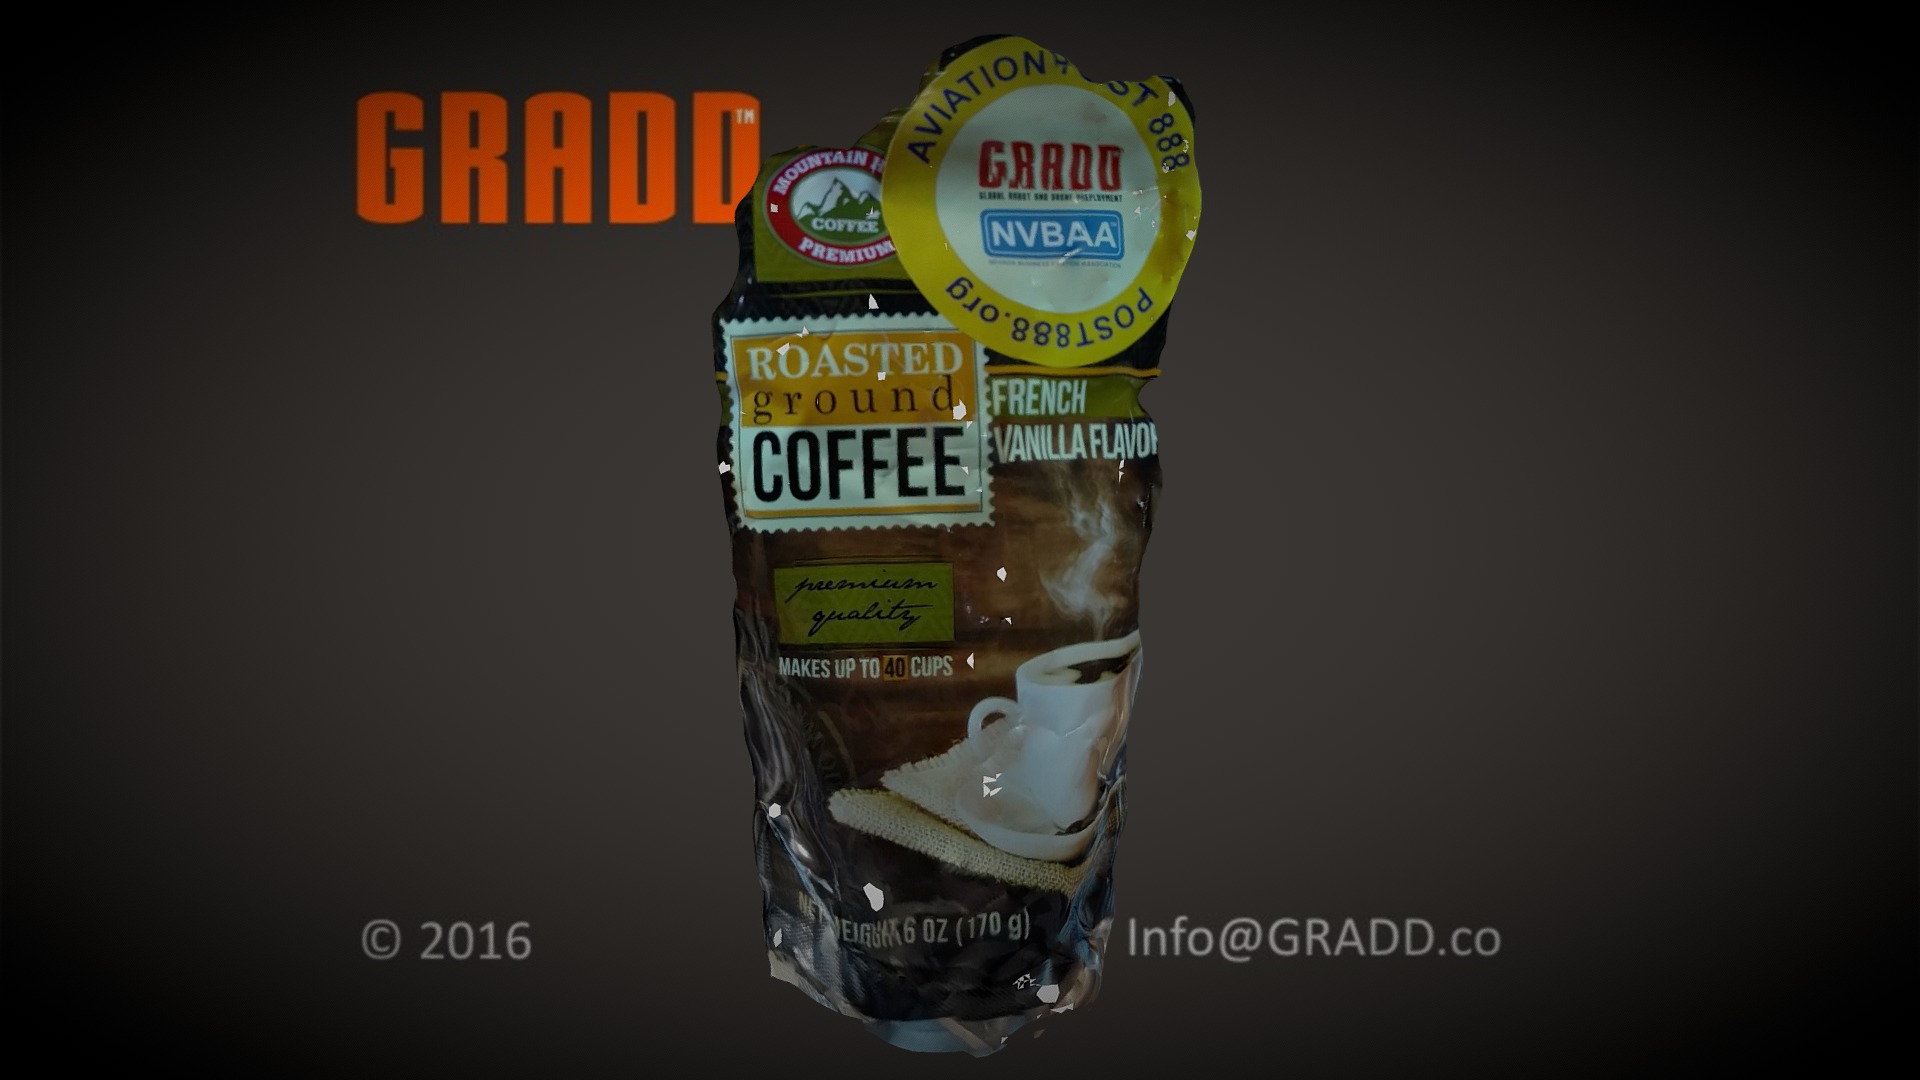 3D model GRADD 3D Model of a Bag of Coffee - This is a 3D model of the GRADD 3D Model of a Bag of Coffee. The 3D model is about graphical user interface.